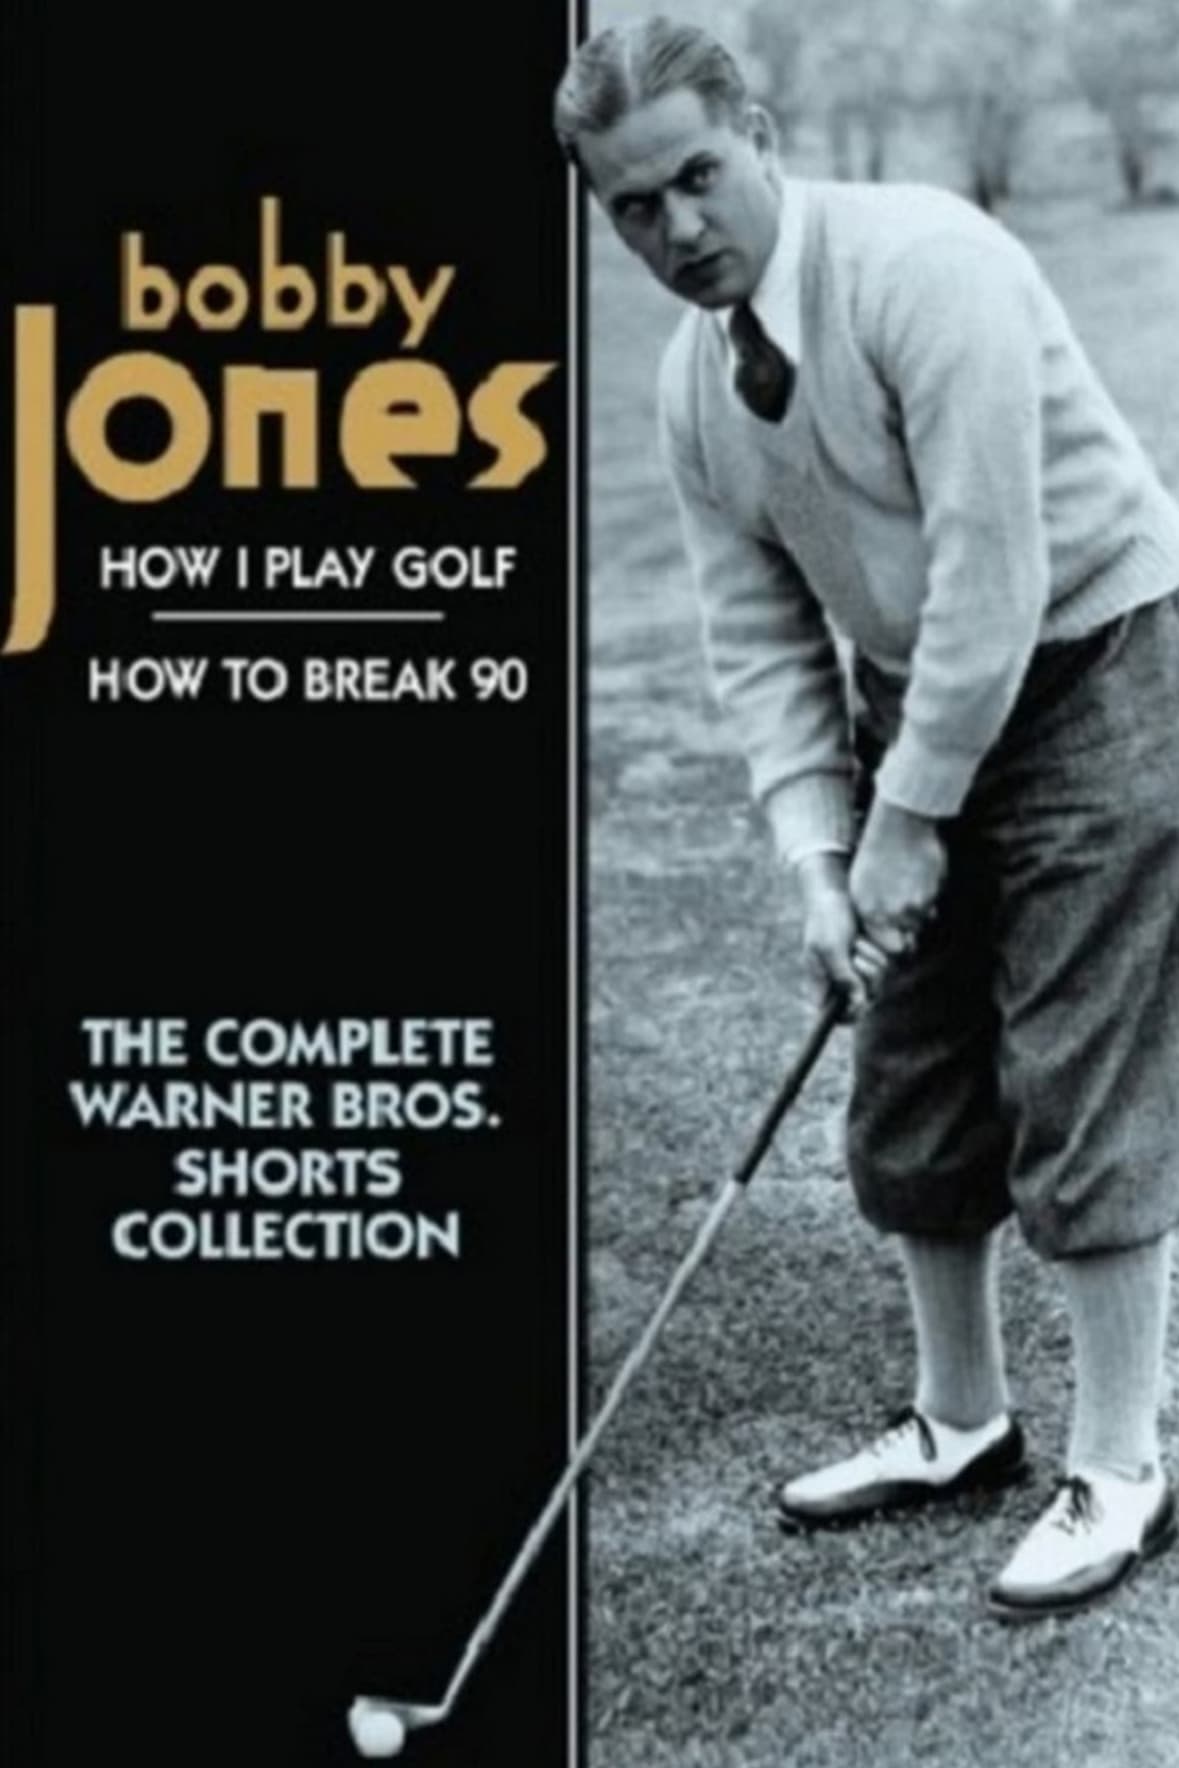 How I Play Golf, by Bobby Jones No. 1: 'The Putter'